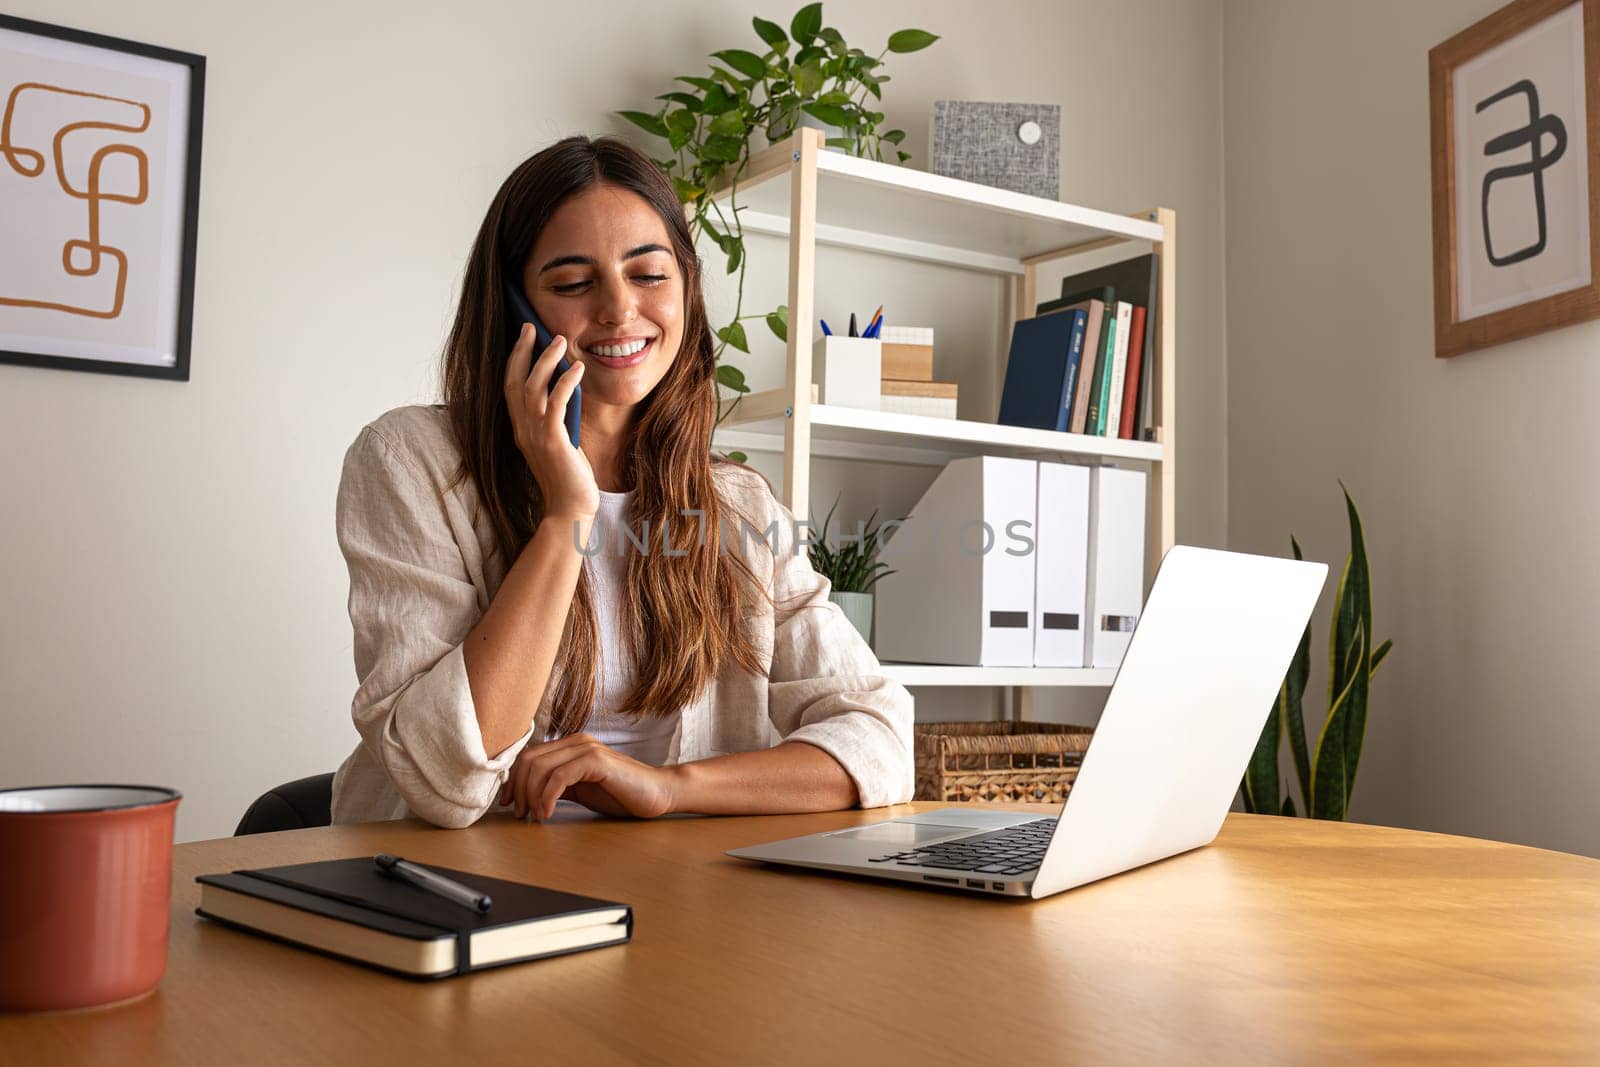 Happy young woman talking on the phone while working at home office using laptop. Technology concept.